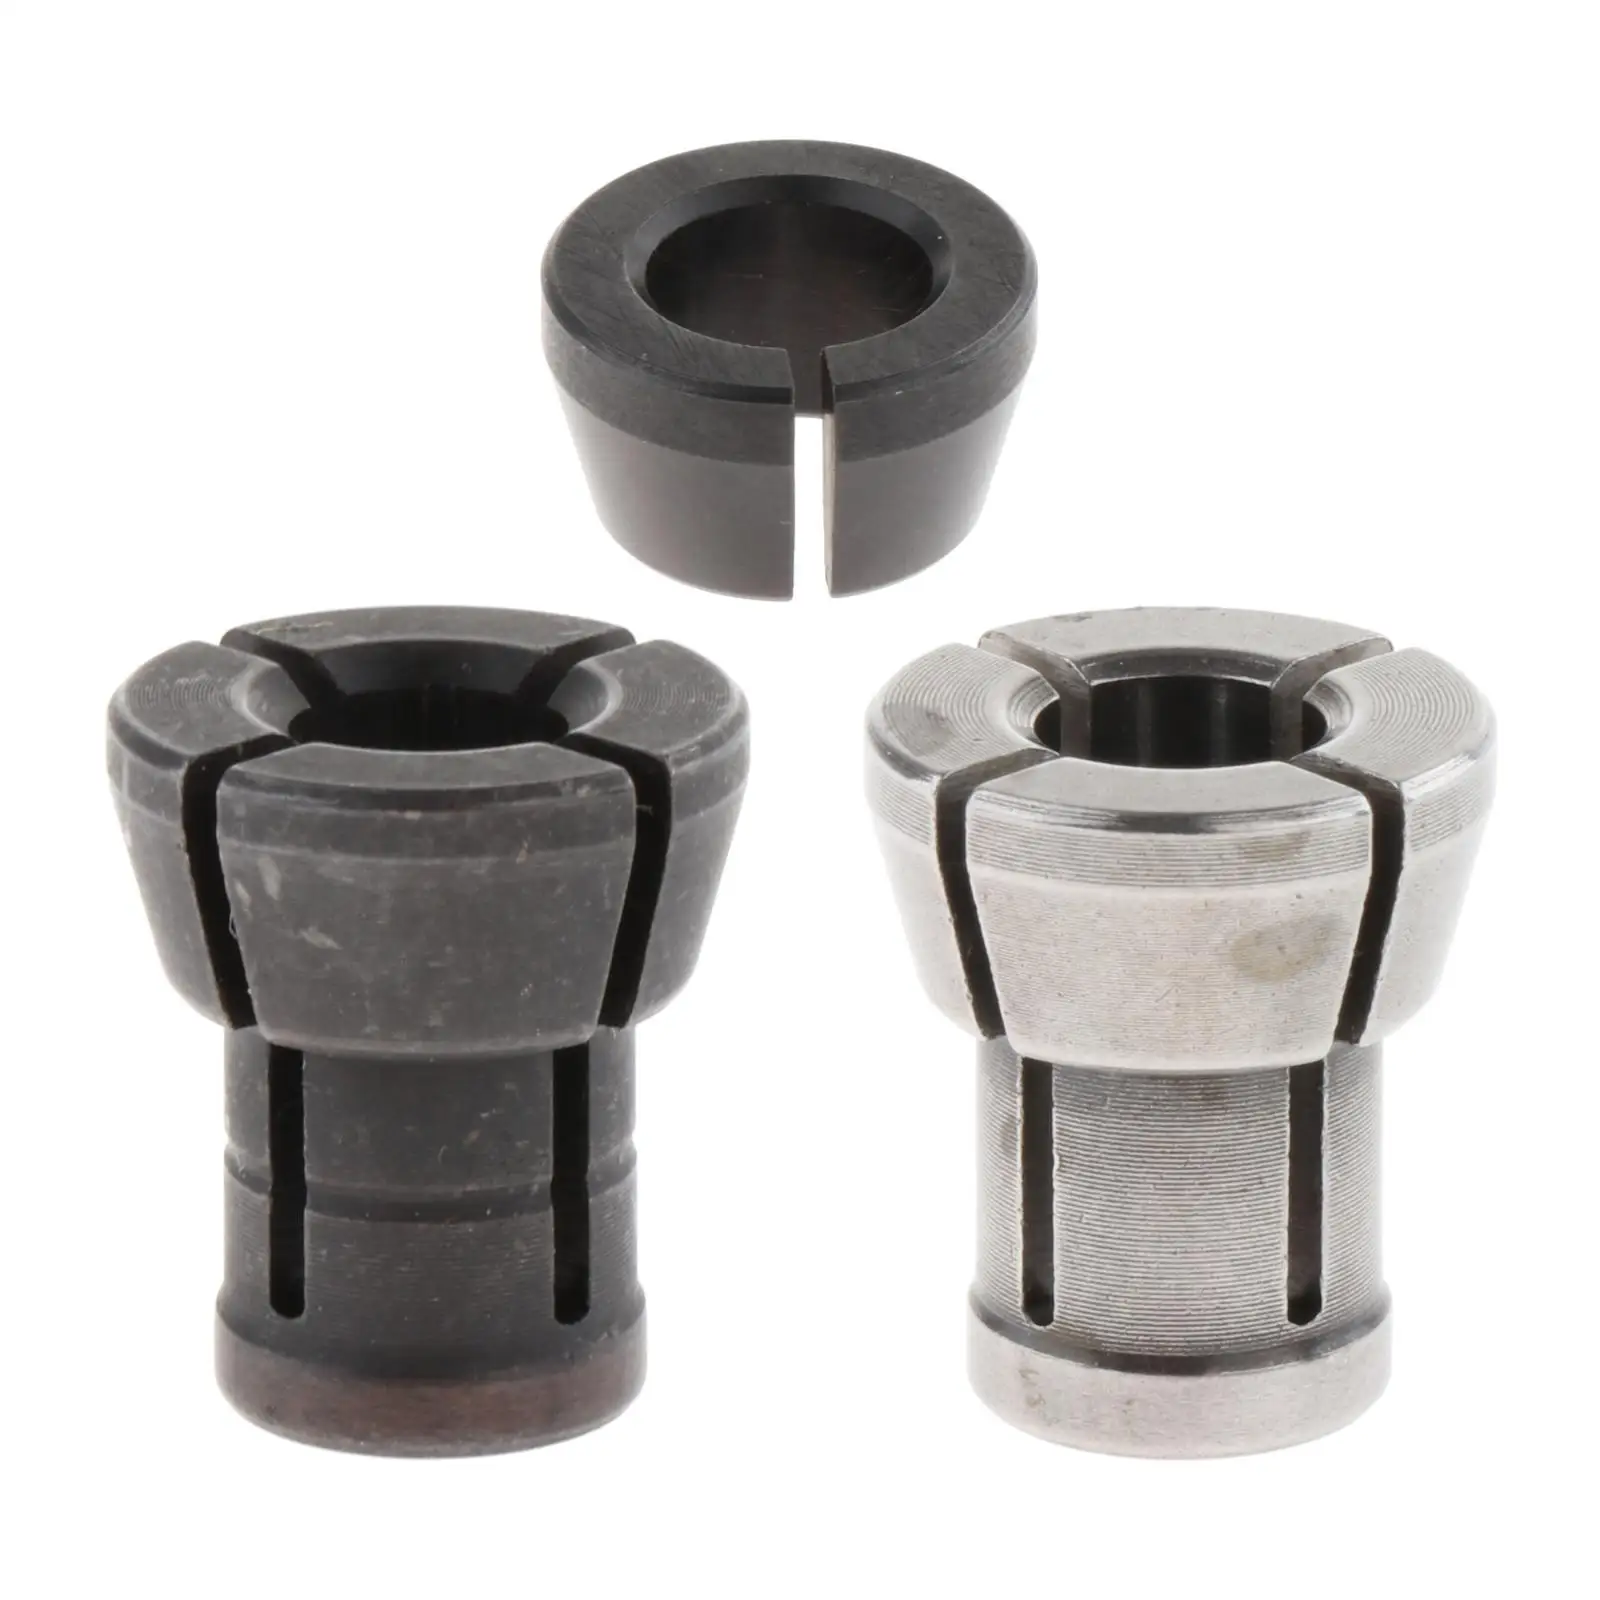 Carbon Steel Bit Collet Chuck Clamping Adapter Replacement Accessories